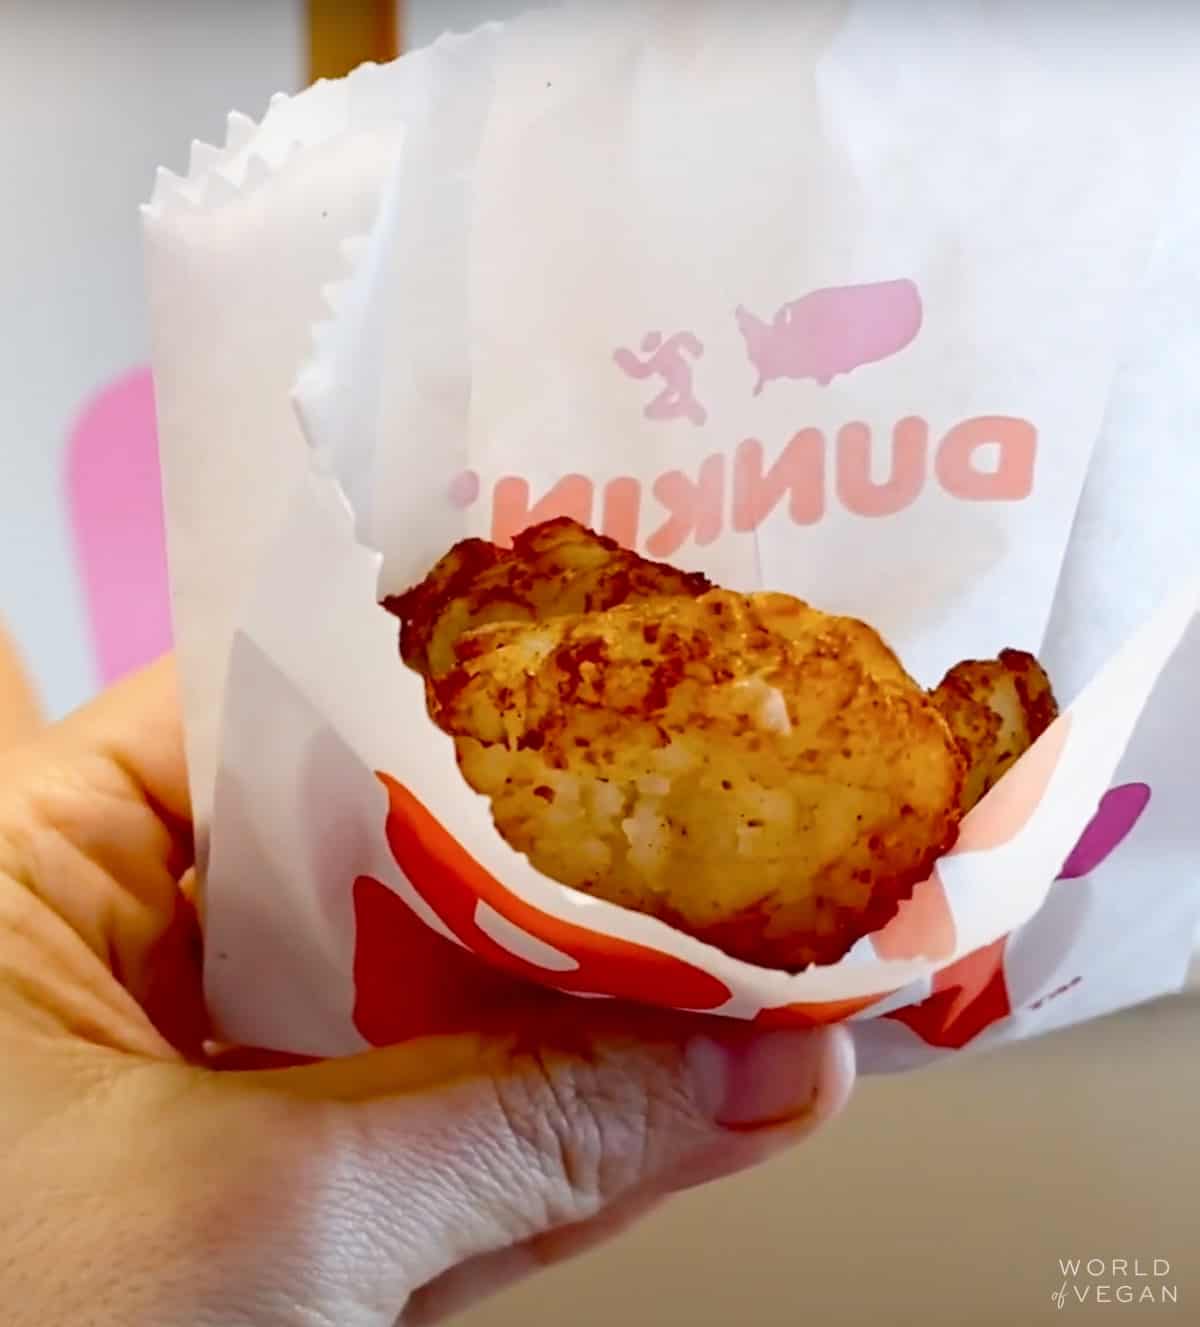 vegan hash browns in a paper bag from dunkin donuts